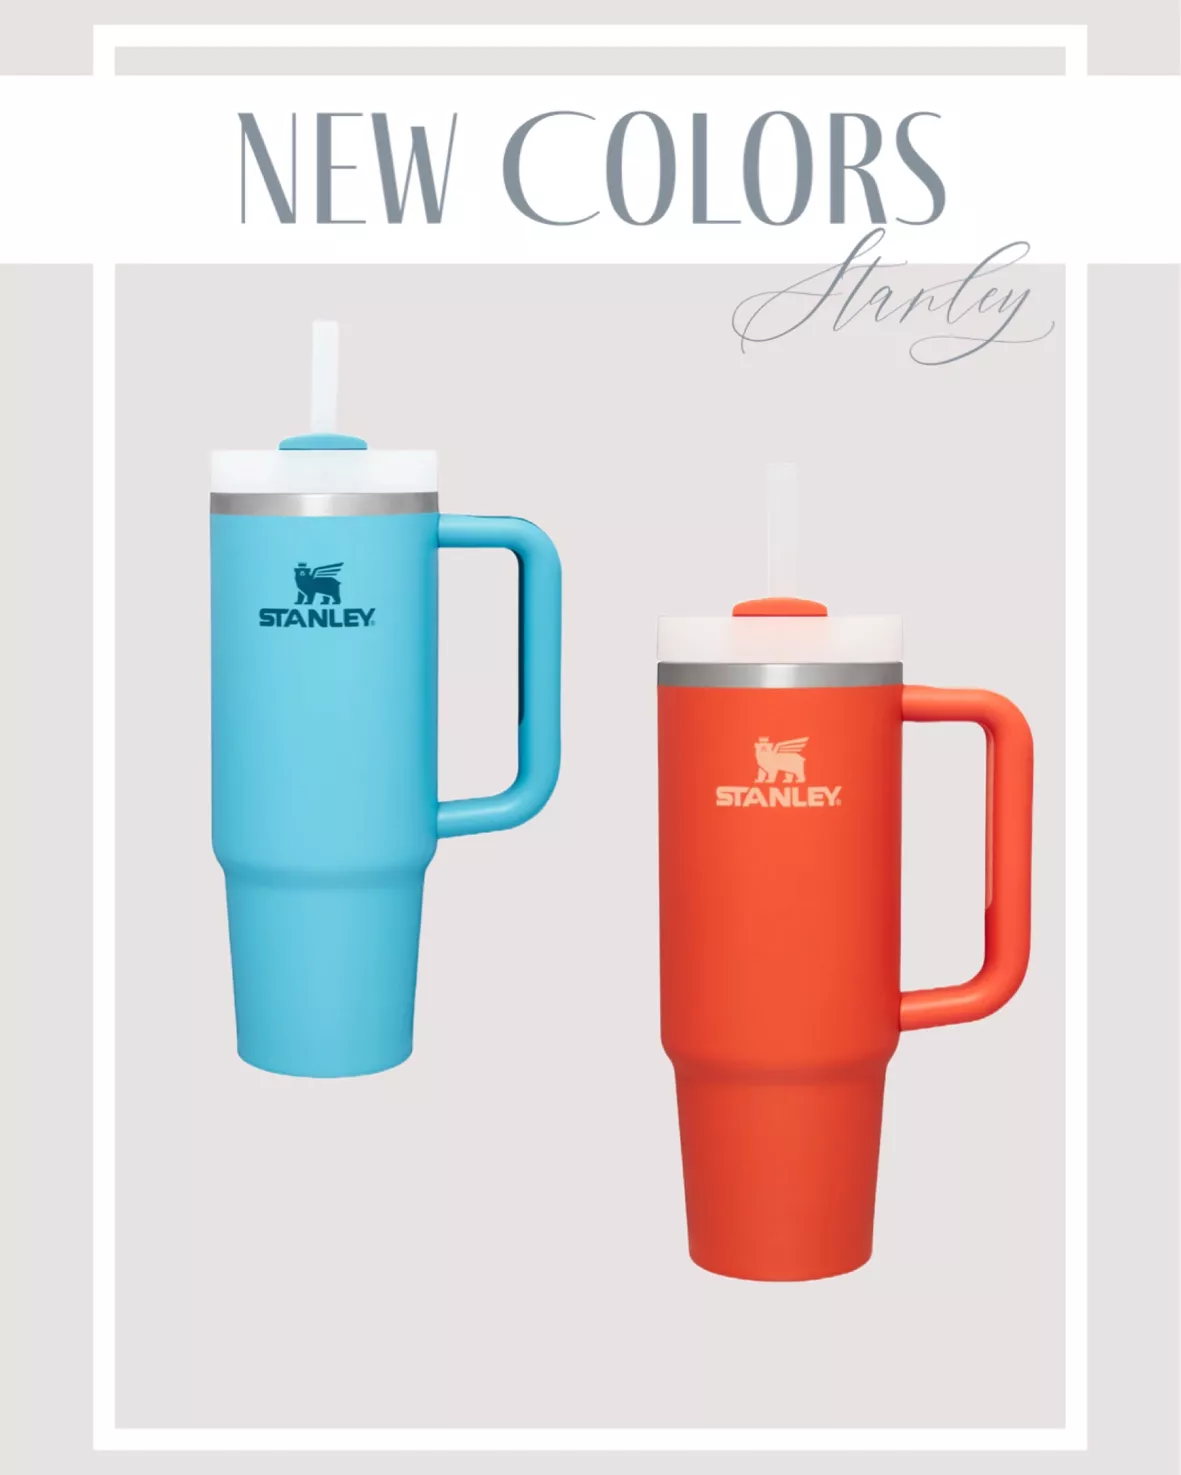 The viral Stanley tumbler comes in 2 new glossy colors and finishes